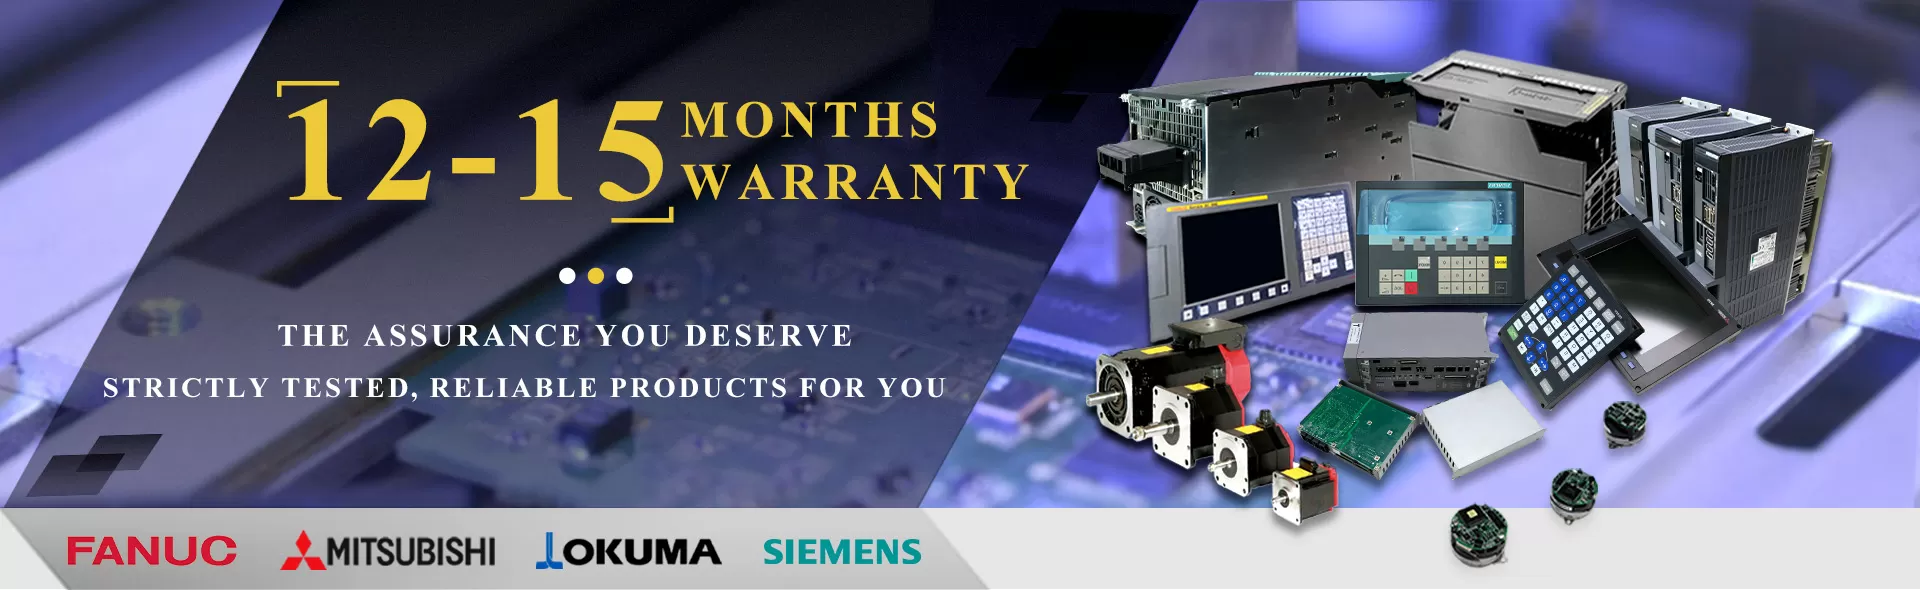 SWCNC 12-15 months warranty for all parts.